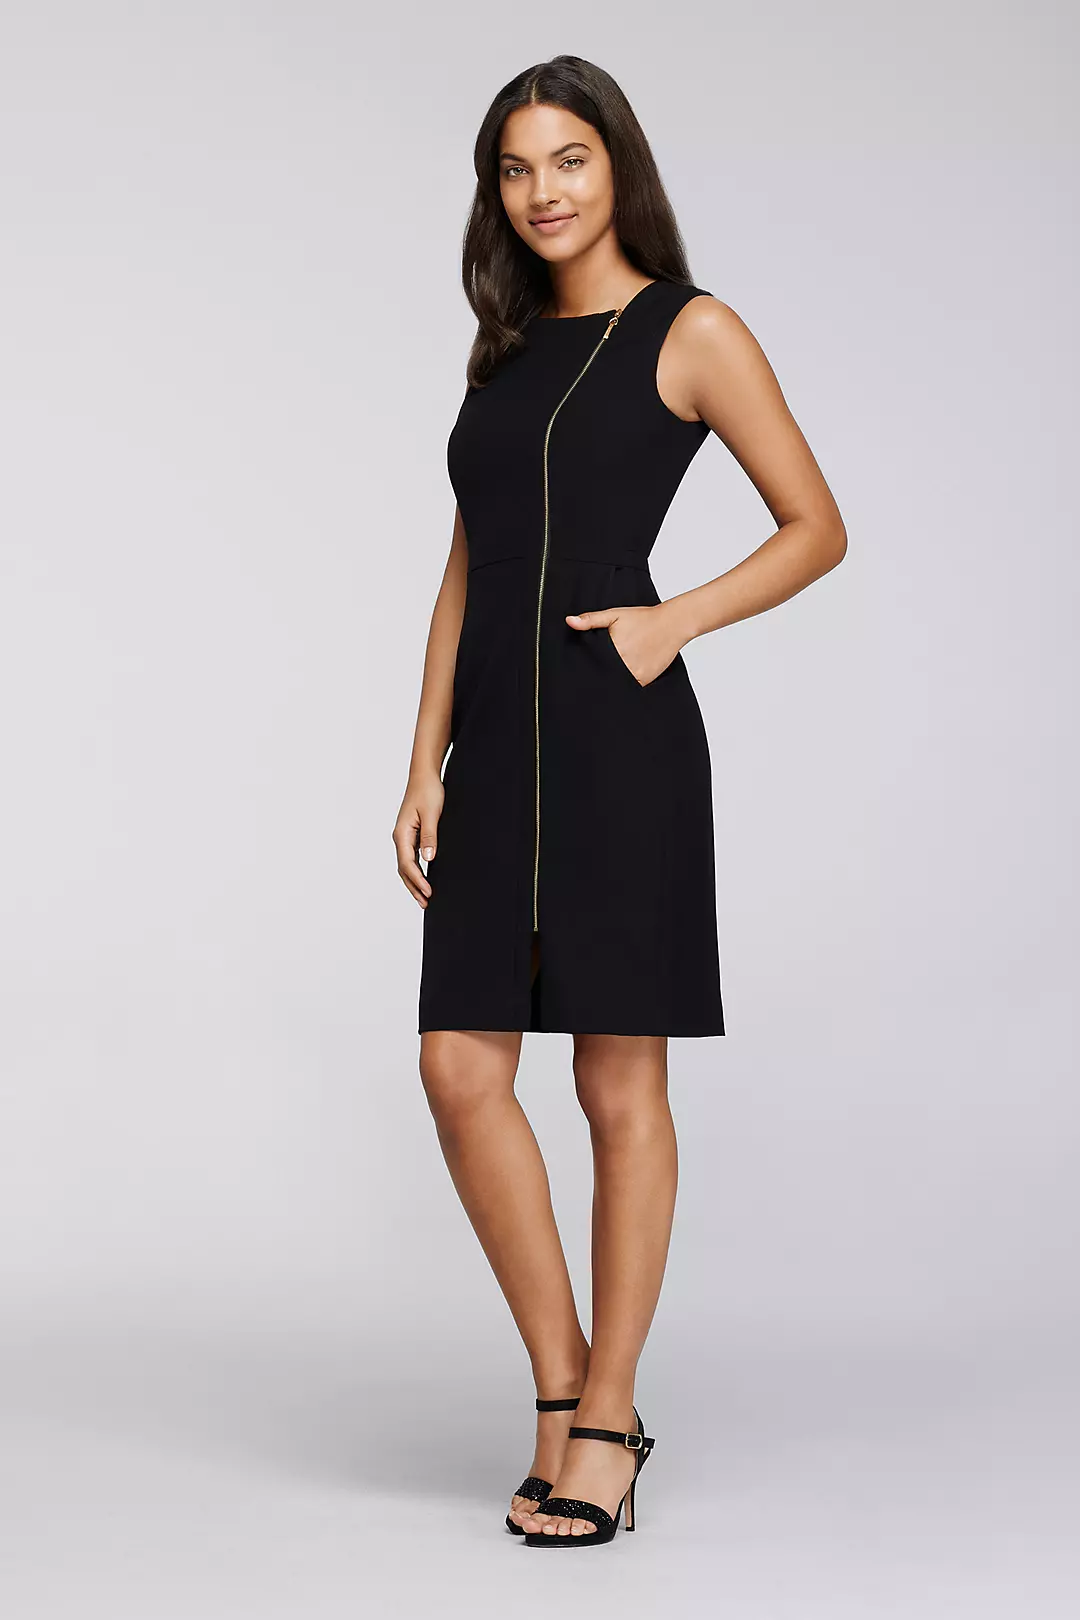 Sleeveless Knee-Length Dress with Front Zipper Image